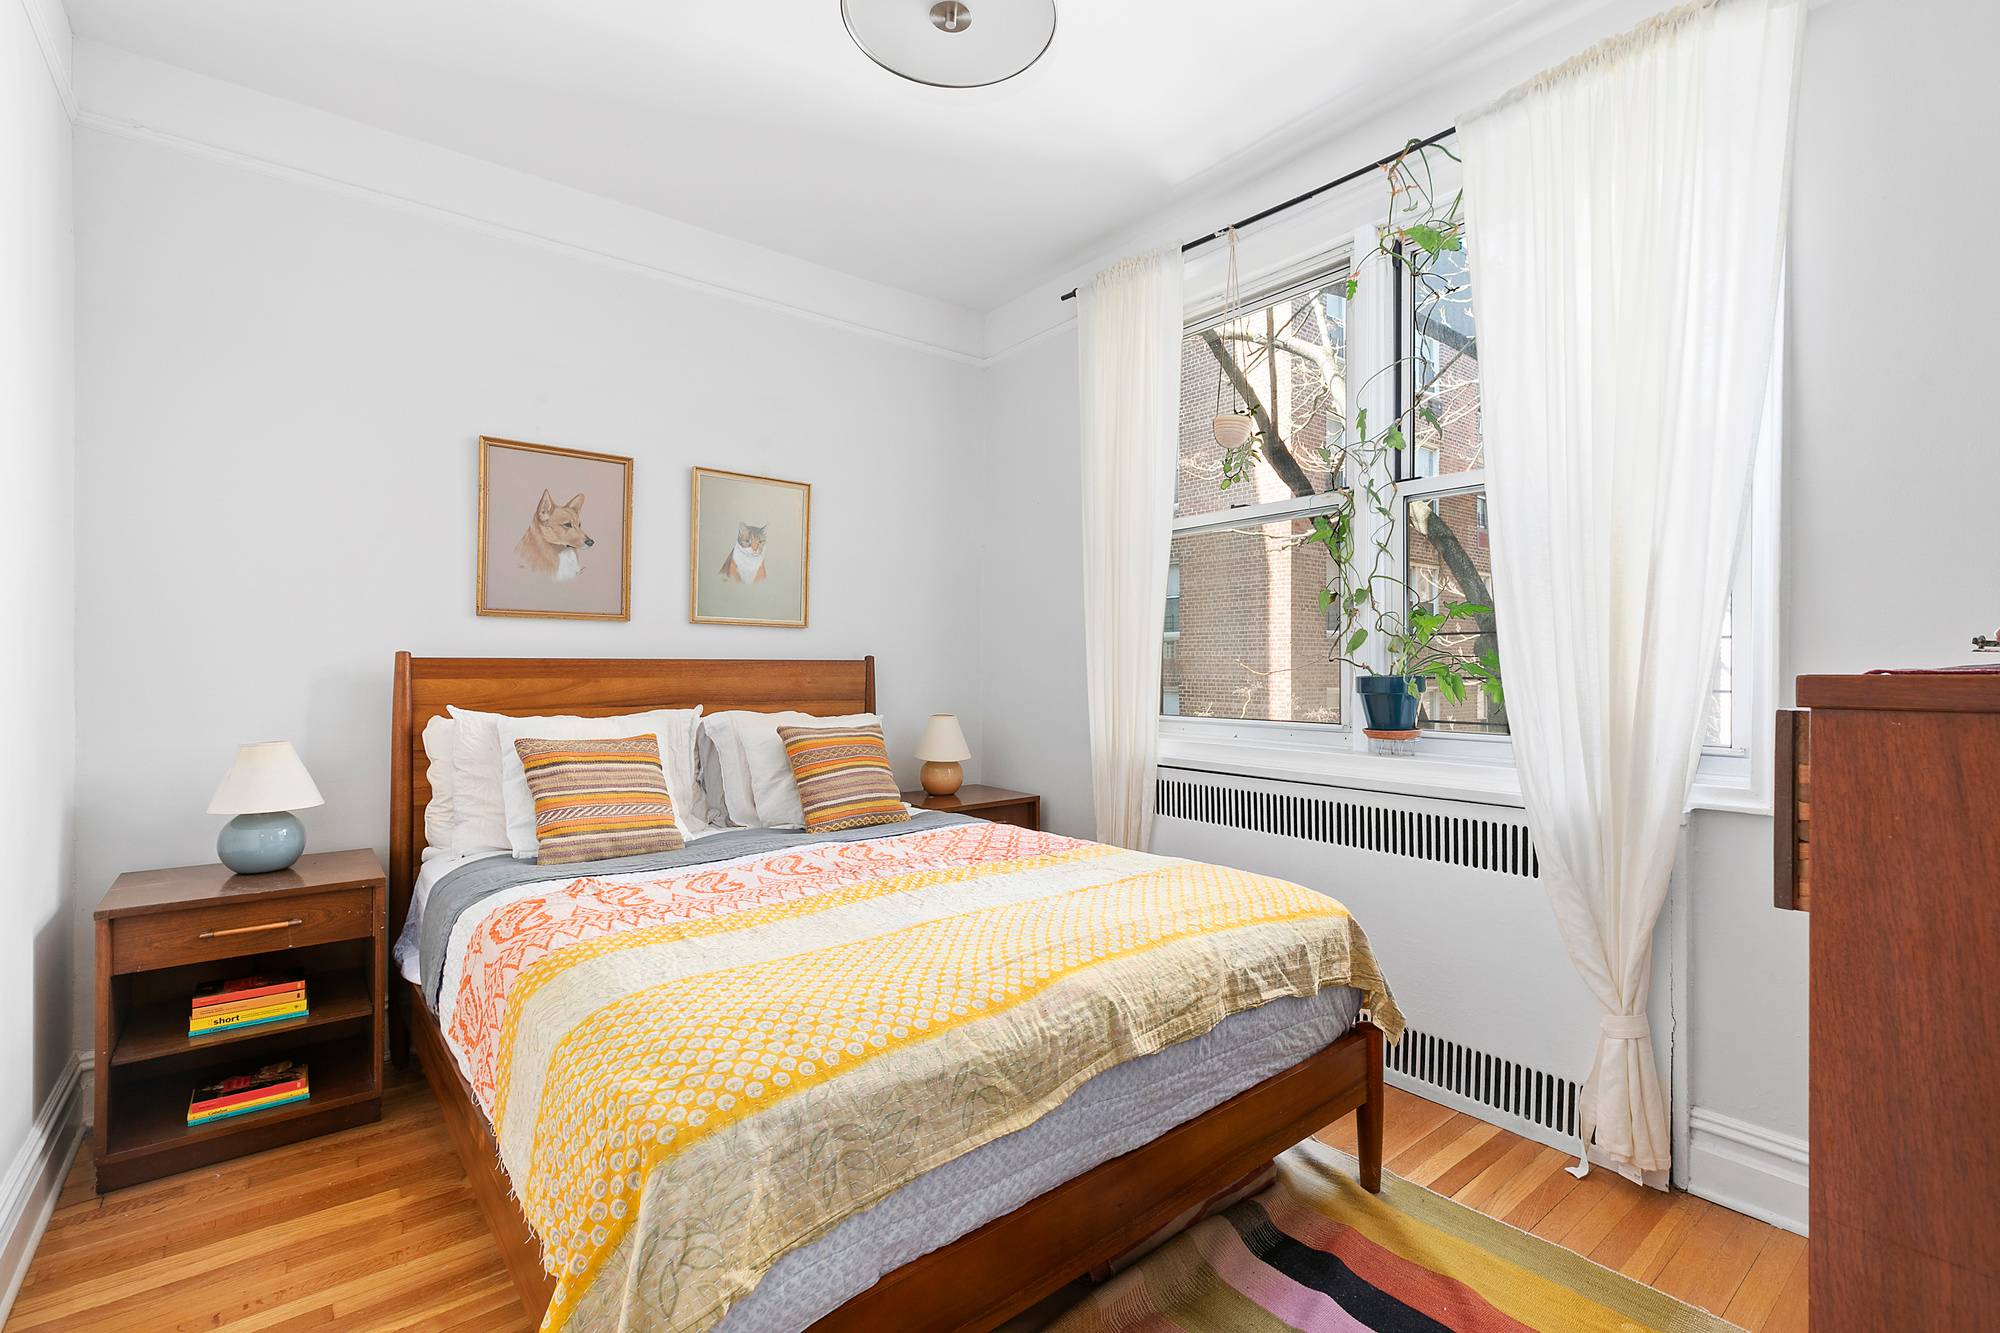 Hygge is the perfect word to describe this sprawling 2 bedroom and 1 bath home in the heart of Ditmas Park.